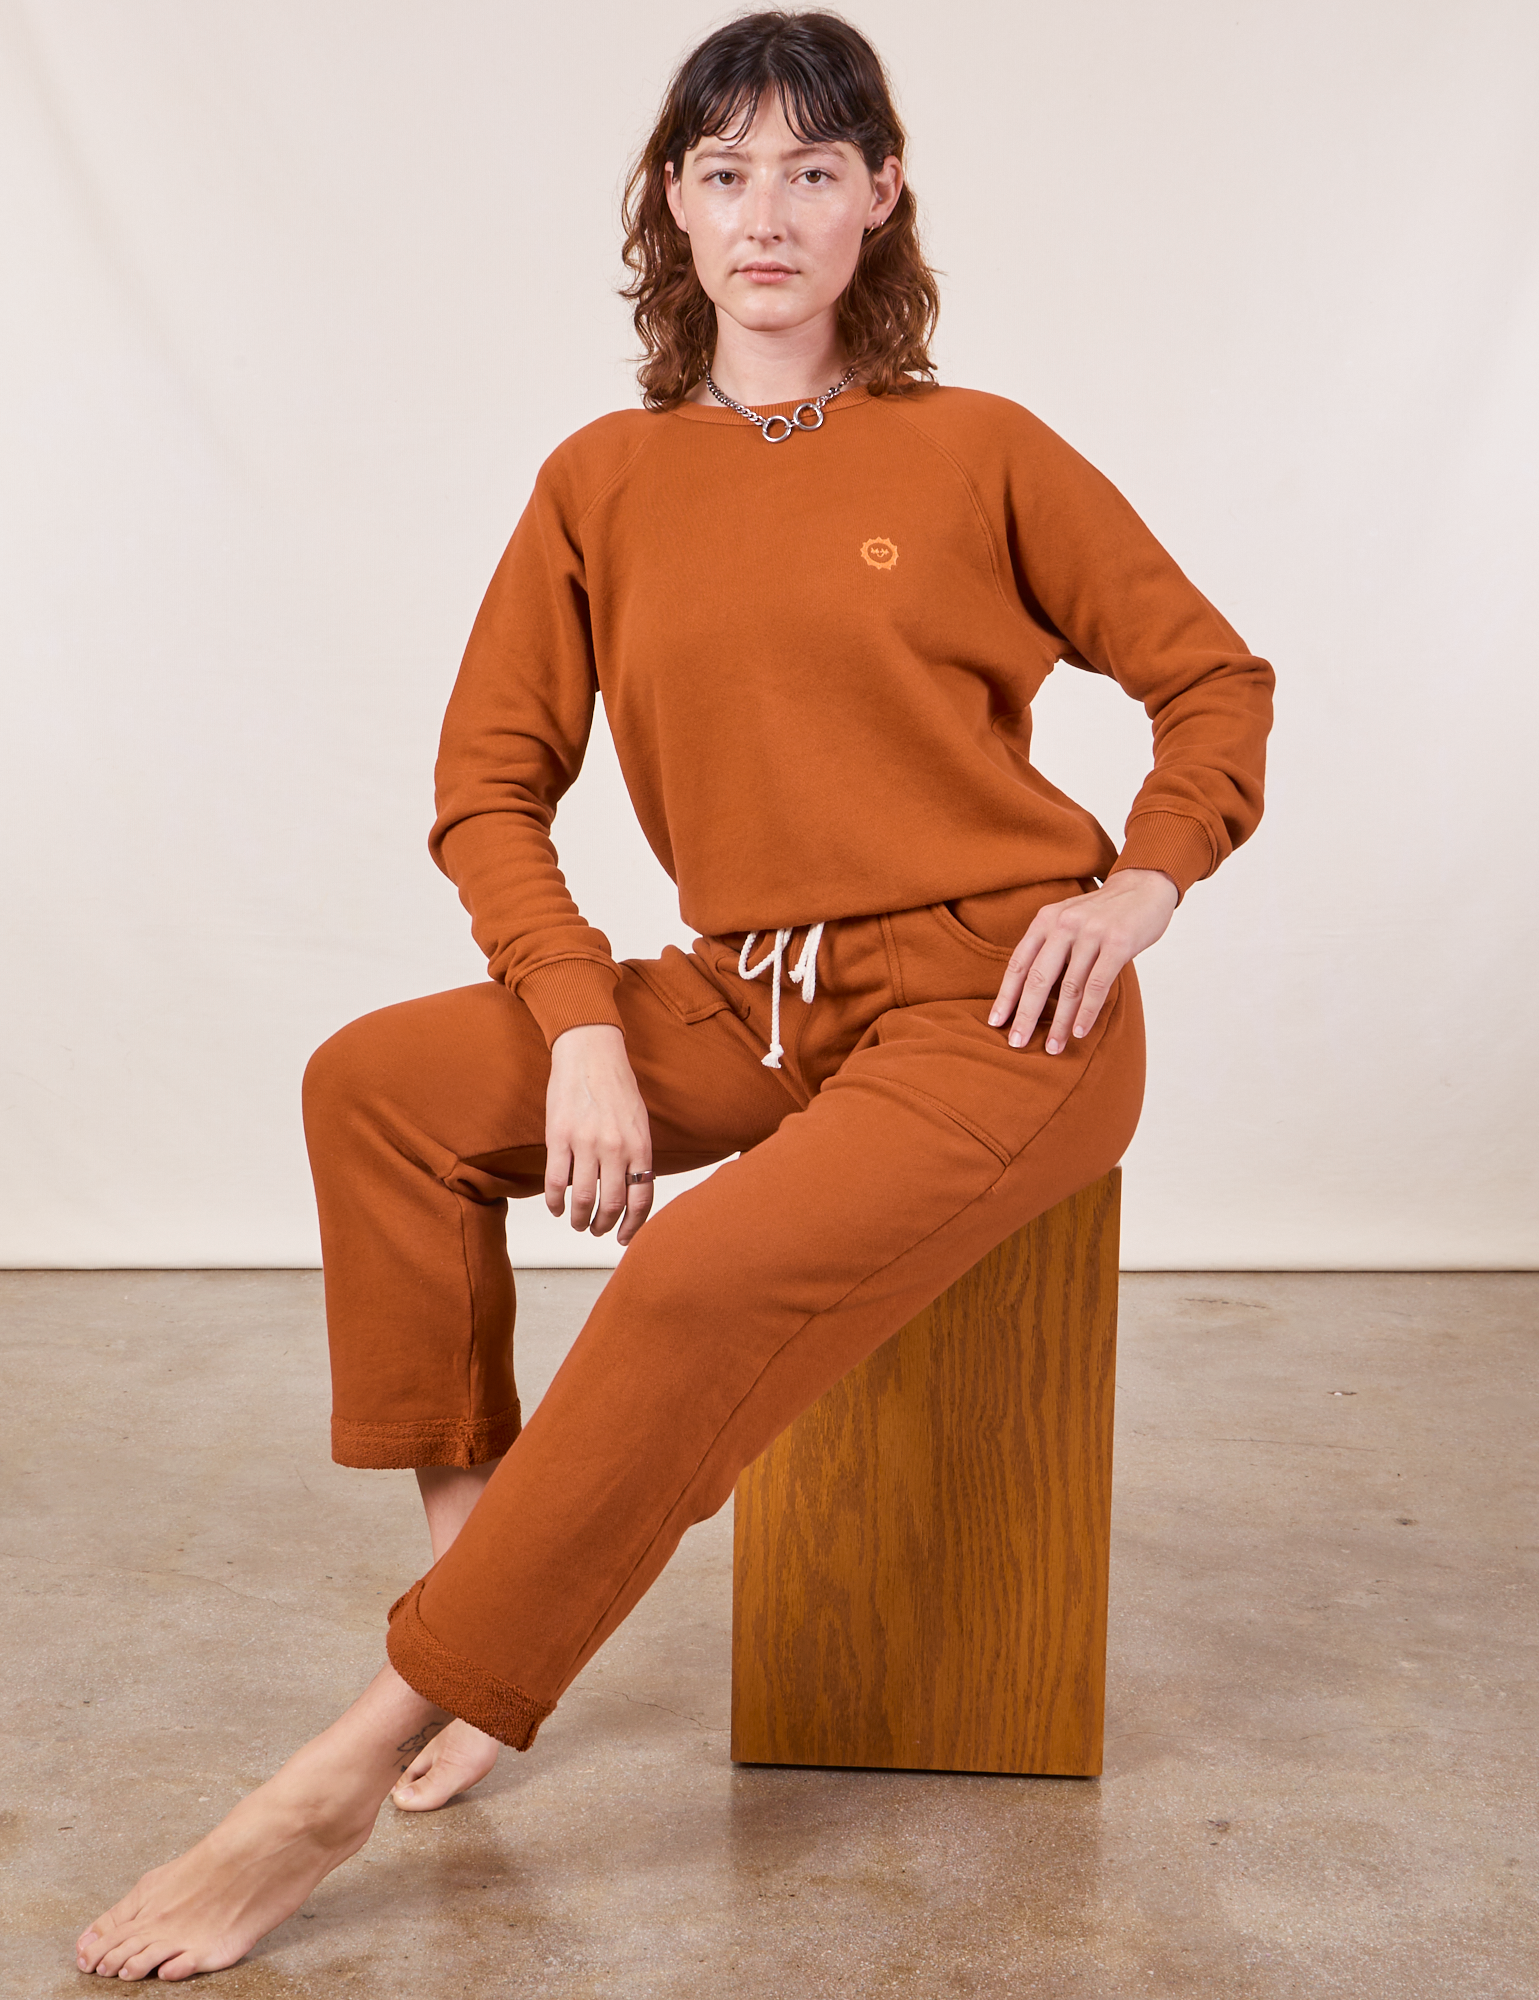 Alex is wearing Heavyweight Crew in Burnt Terracotta and Cropped Rolled Cuff Sweatpants